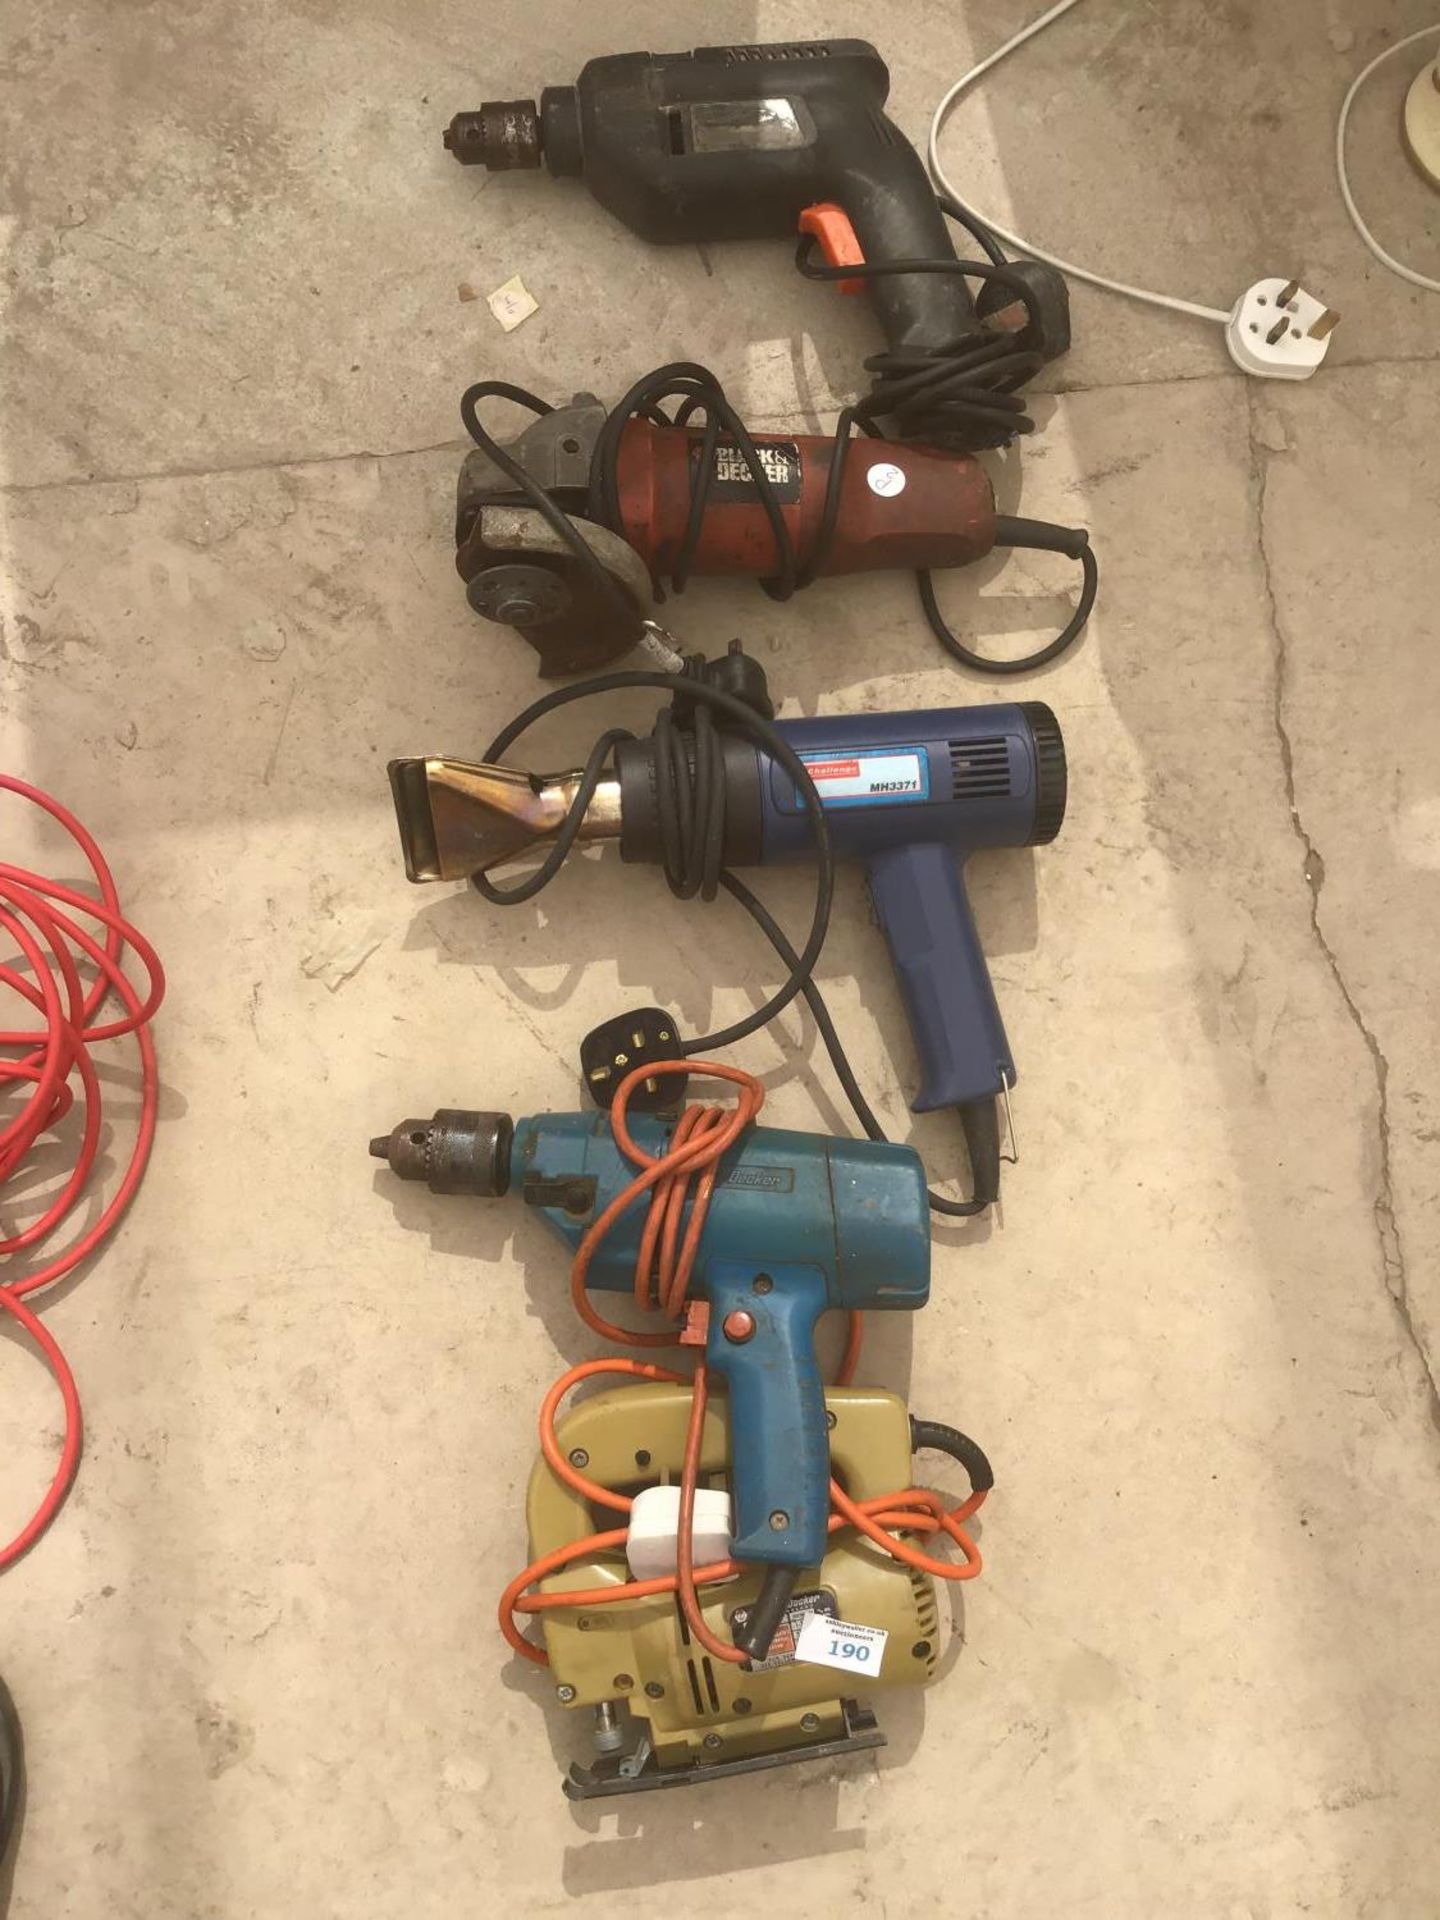 FIVE POWER TOOLS TO INCLUDE TWO DRILLS, A HEAT GUN, AND JIG SAW IN WORKING ORDER AND AN ANGLE